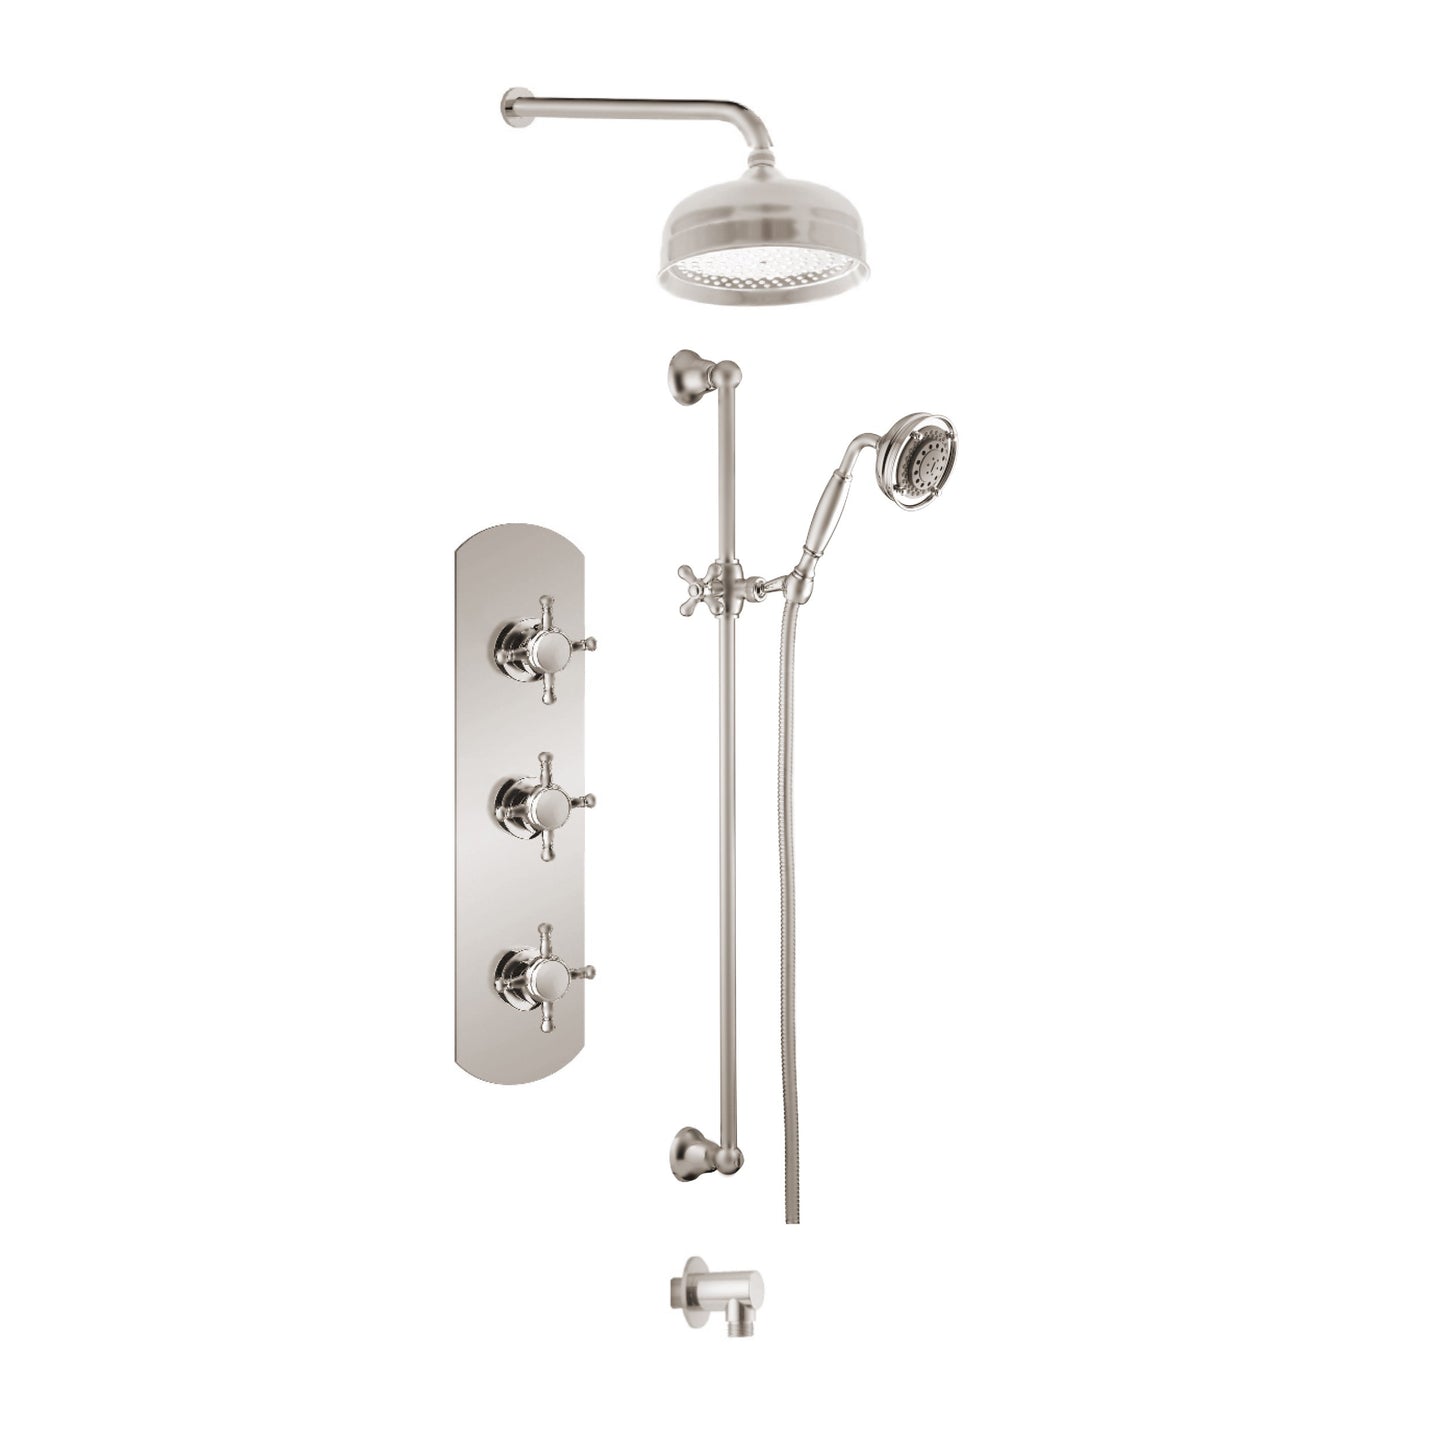 Aquadesign Products Shower Kit (Queen 3711QX) - Brushed Nickel